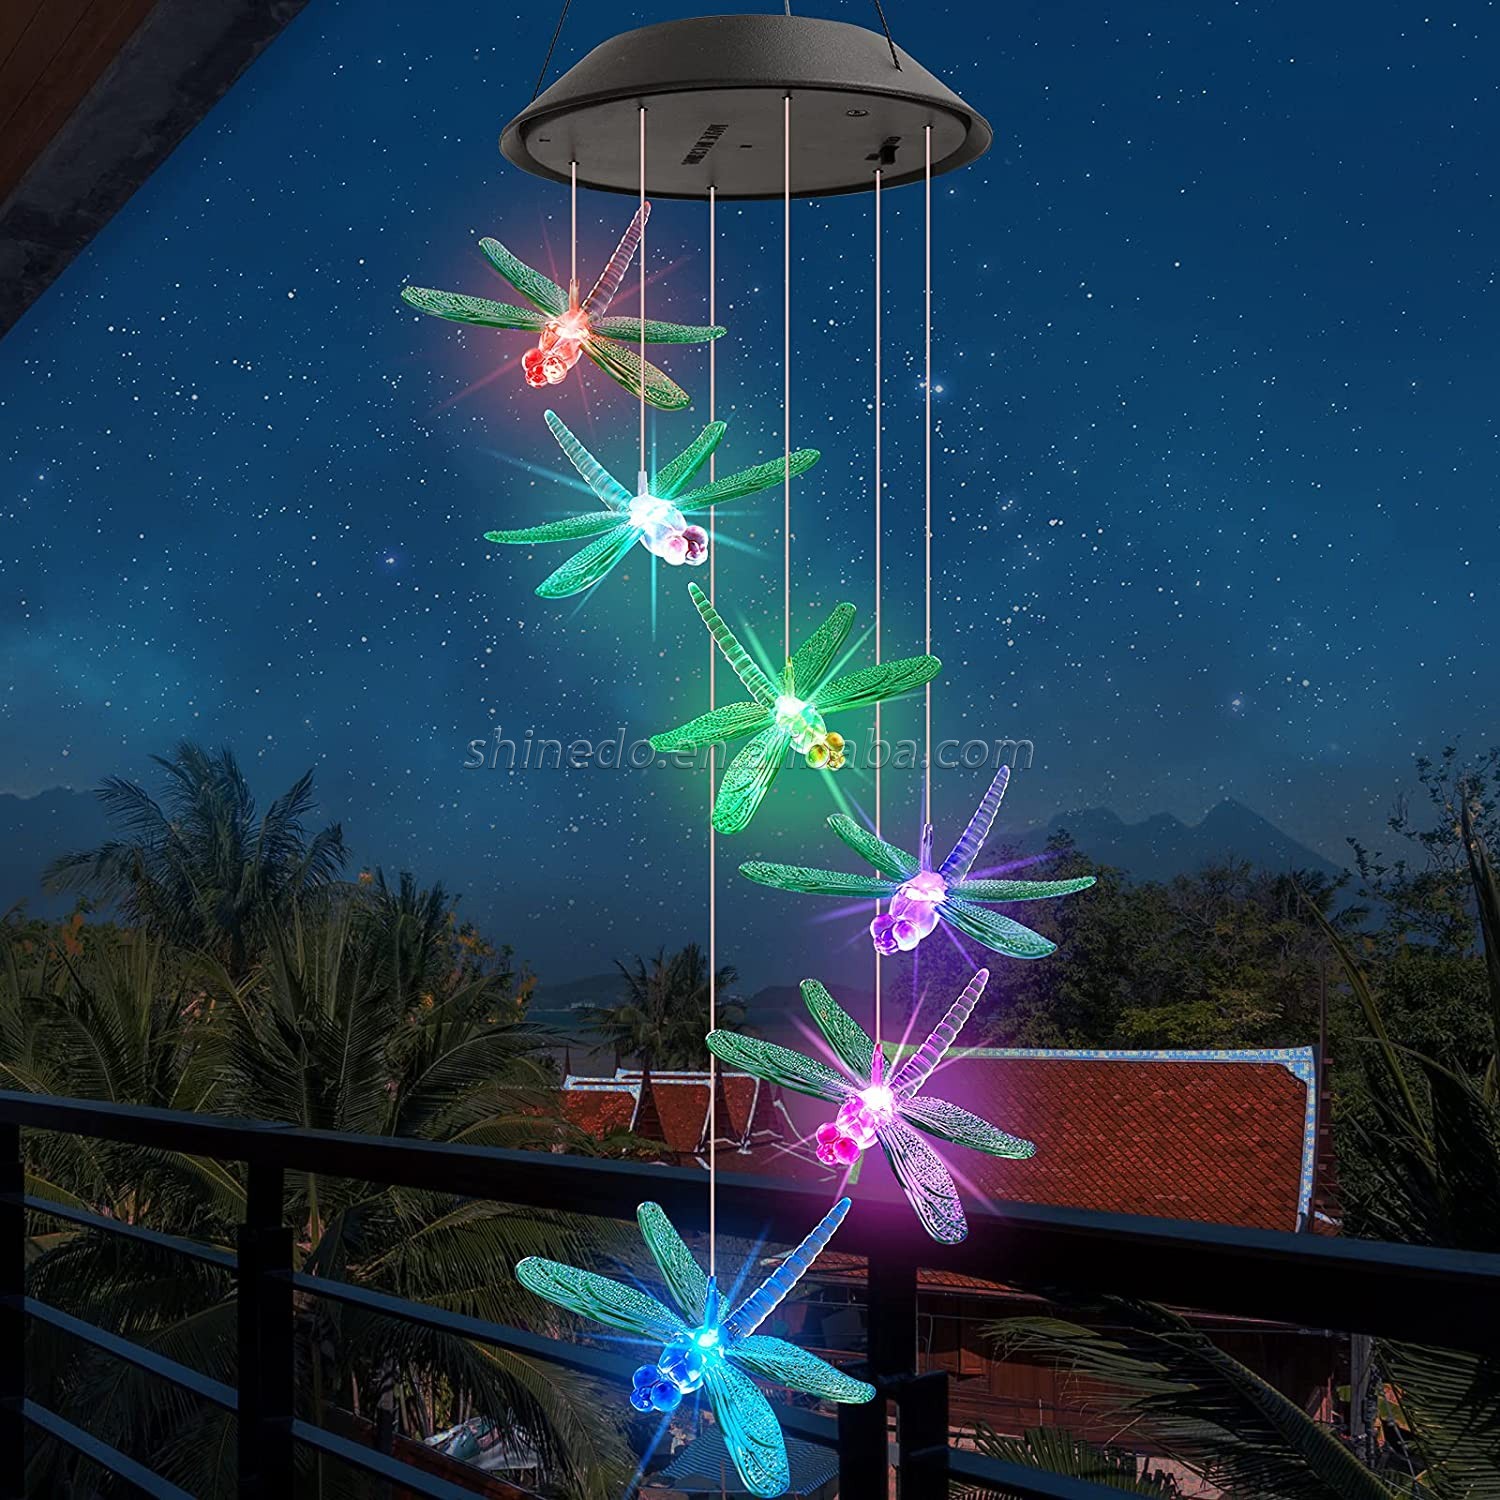 Dragonfly Waterproof Led Decorative Wind Chimes 7 Color Changing Solar Wind Chime Light